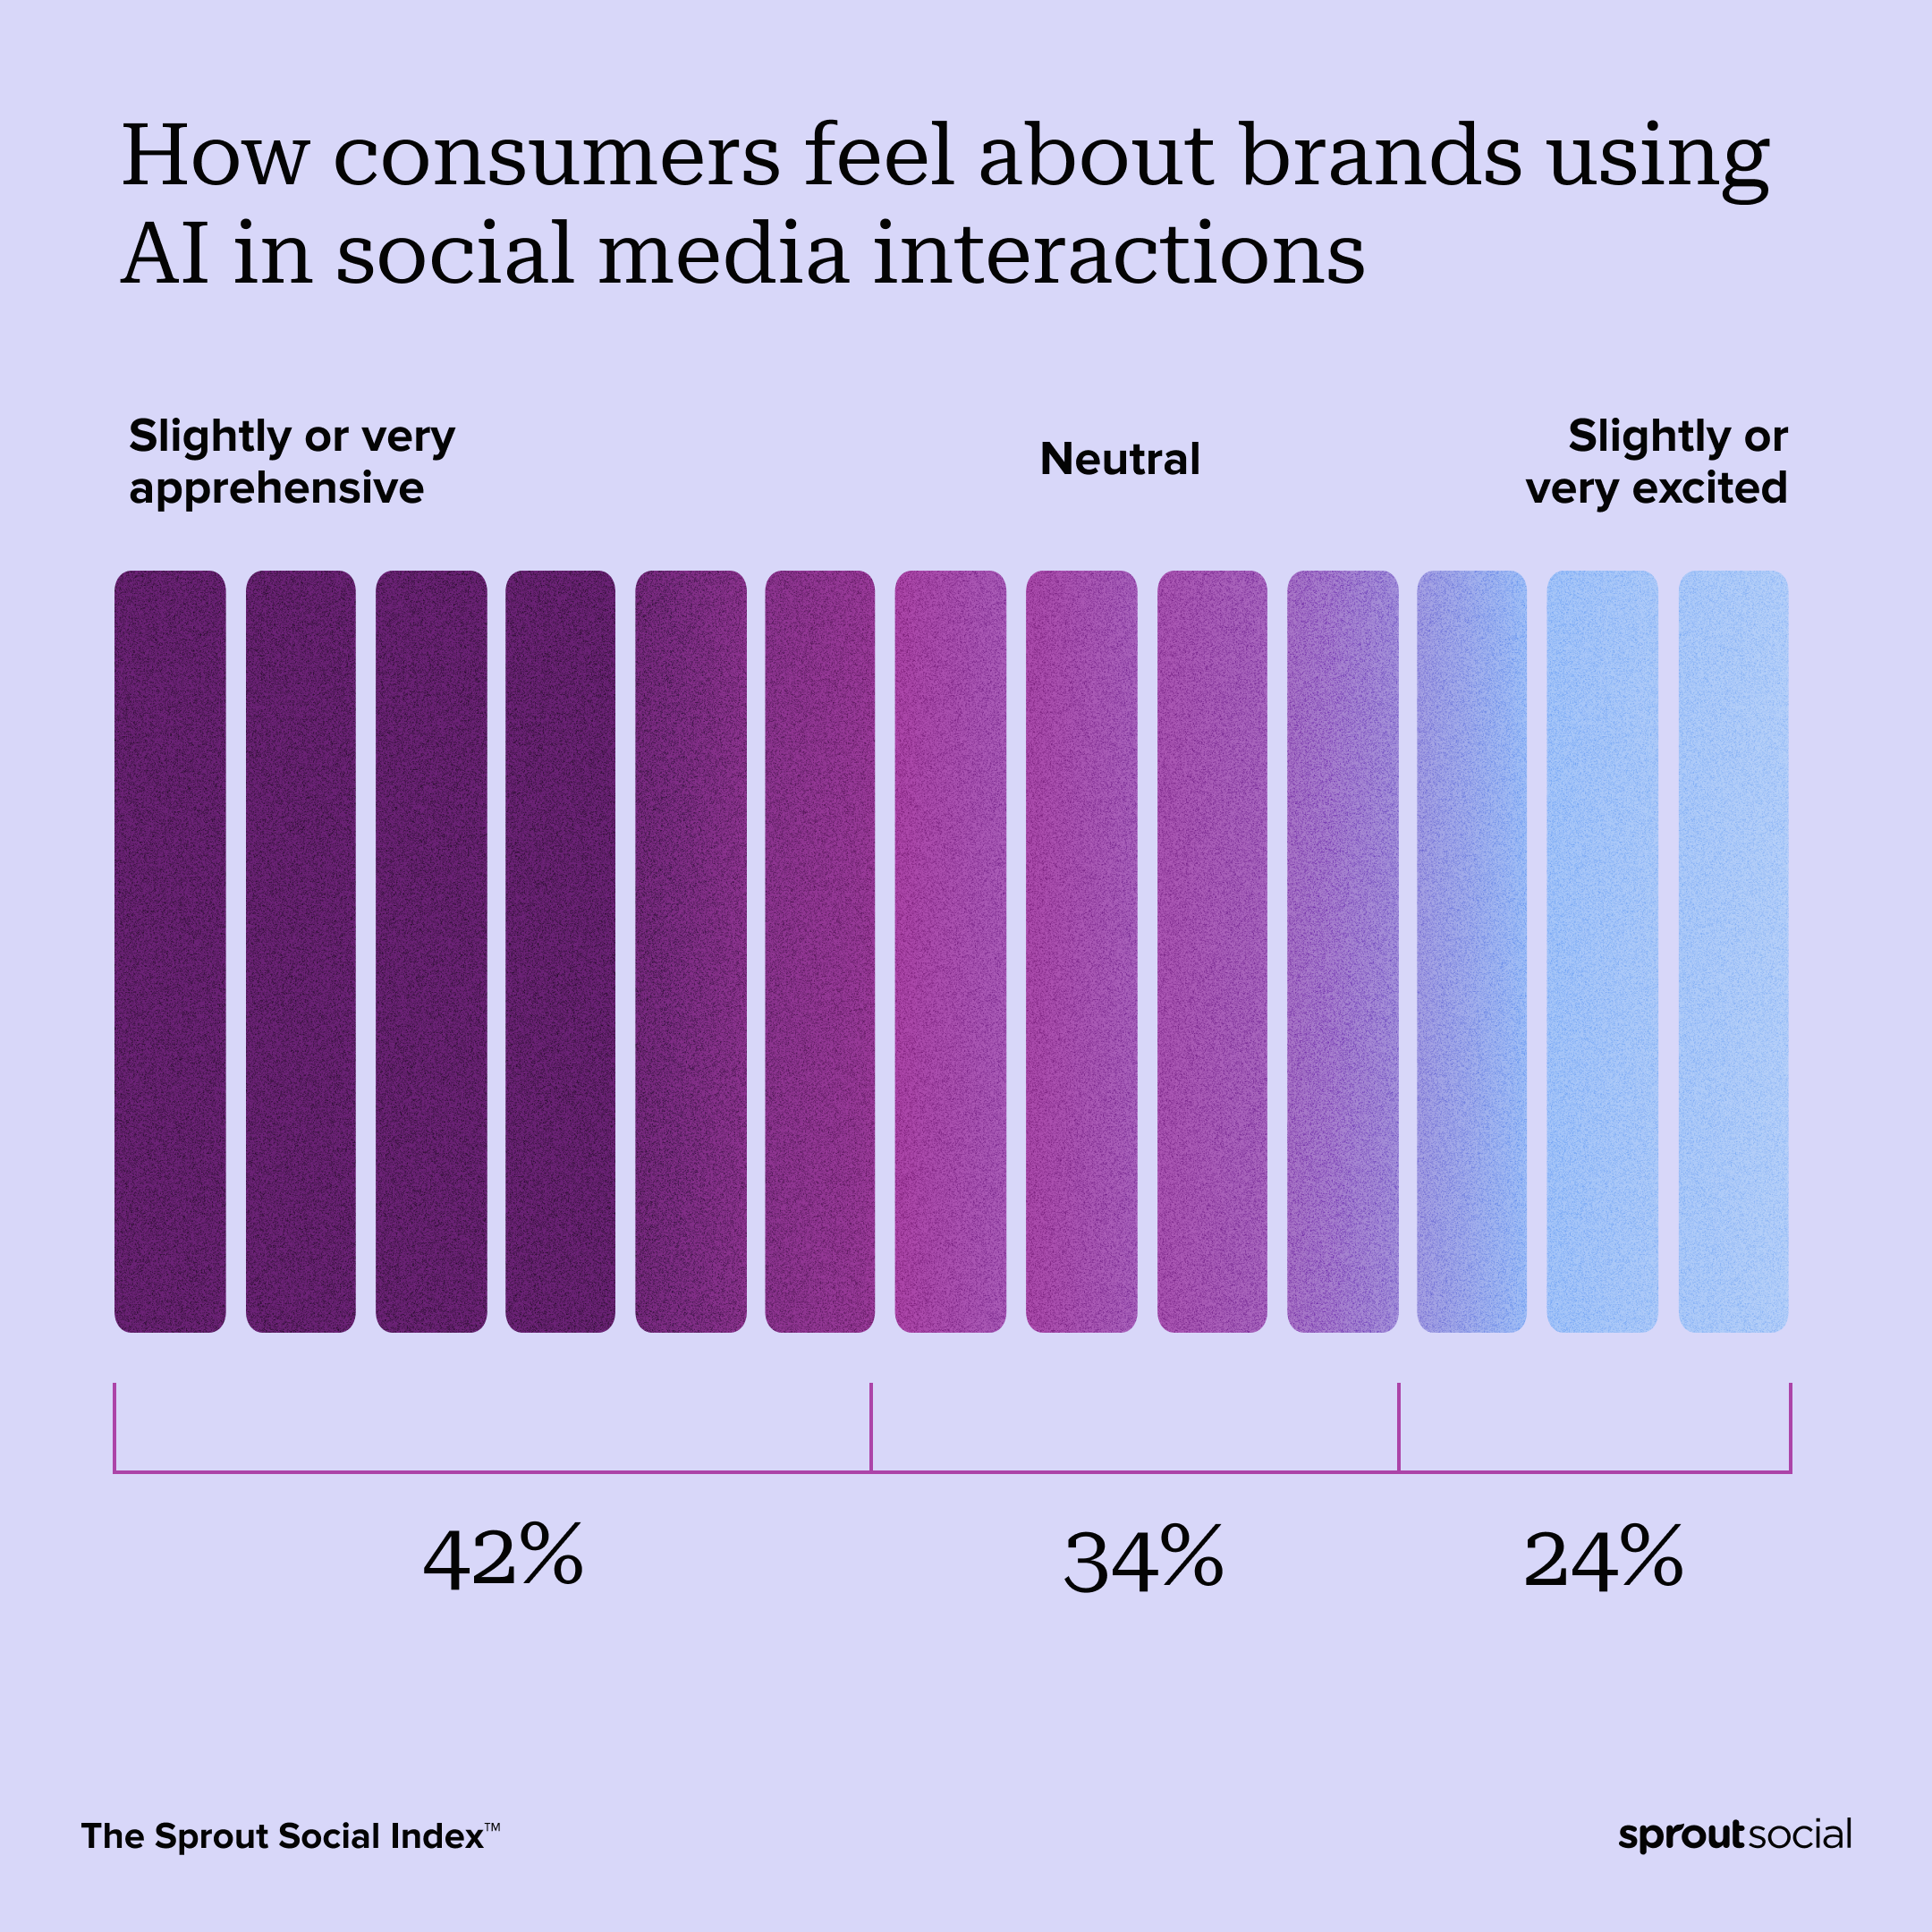 A data visualization from The Sprout Social Index™ illustrating consumer apprehension towards brands using artificial intelligence in social media interactions. Nearly half (42%) of consumers feel slightly or very apprehensive, while 24% feel slightly or very excited. Another 34% feel neutral.